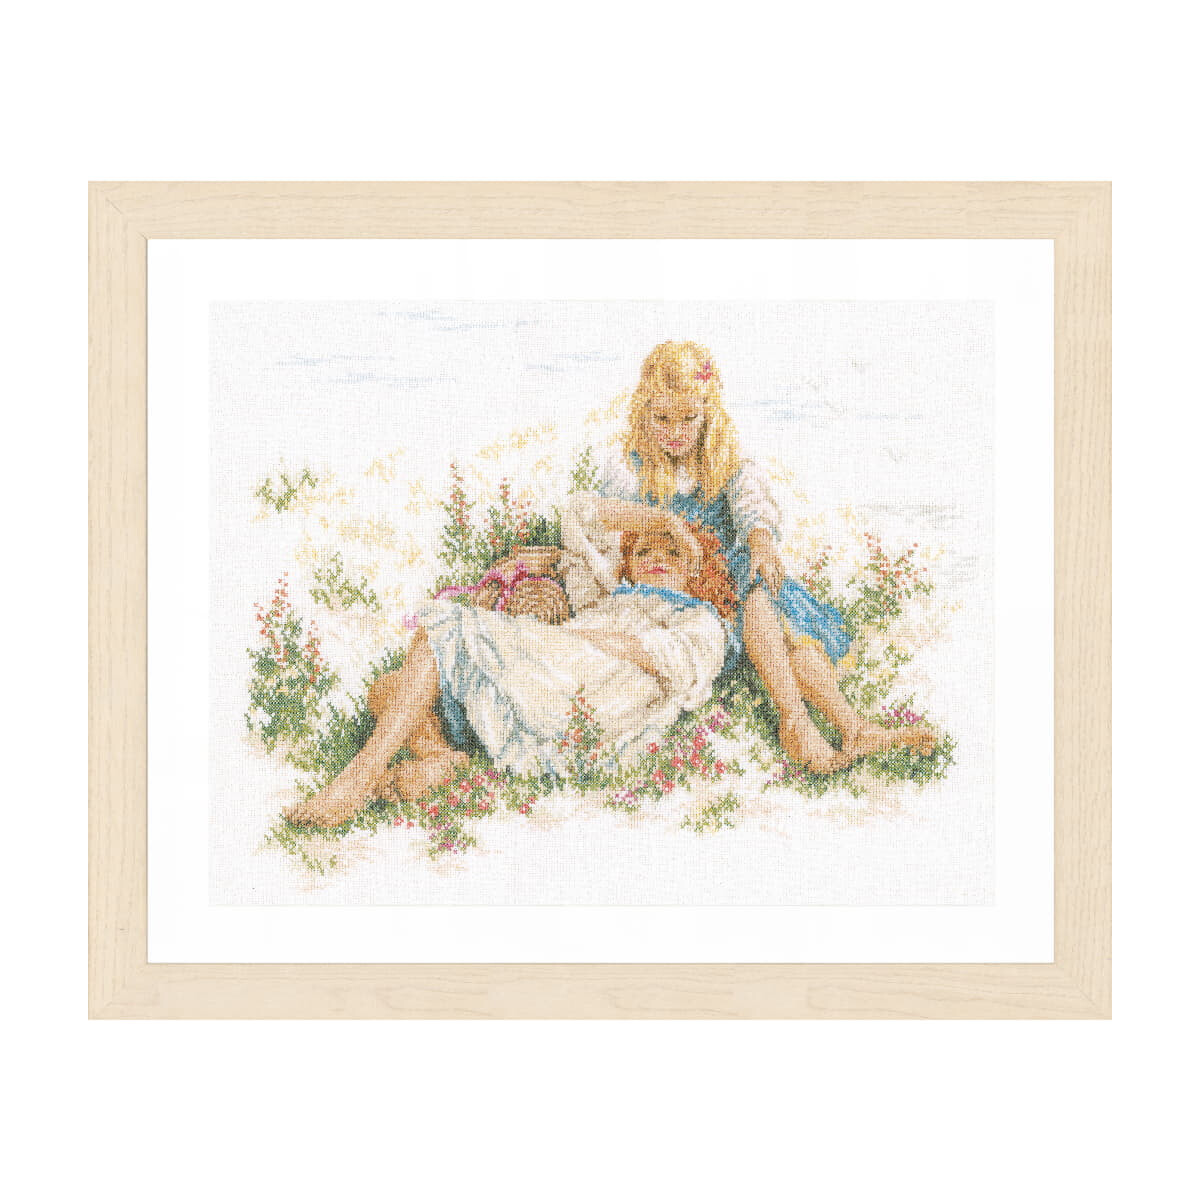 Framed Lanarte embroidery pack showing two children...